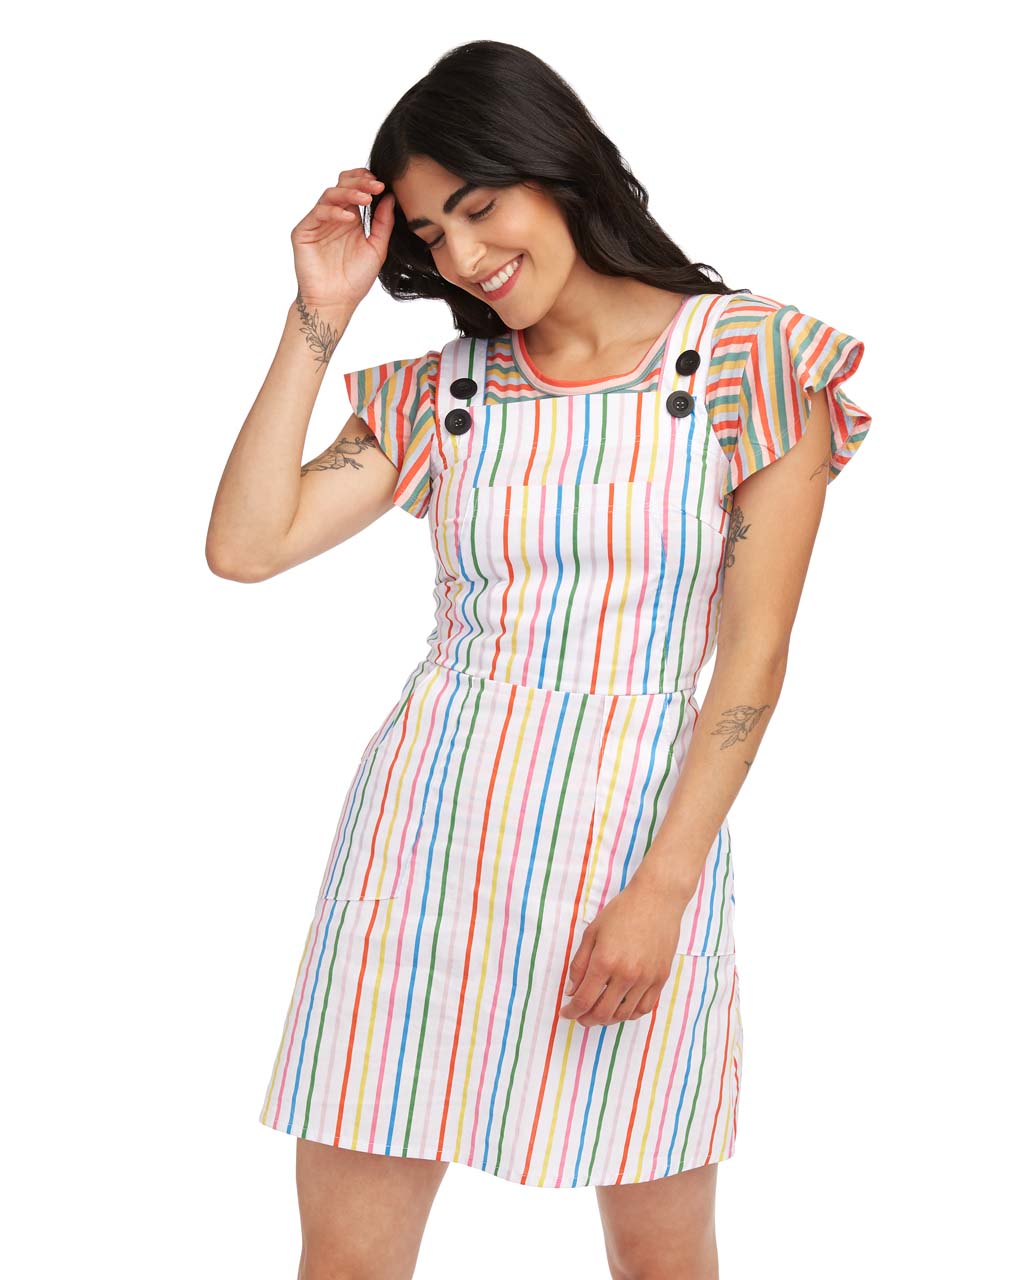 Overall Dress - Rainbow Stripe by ban 